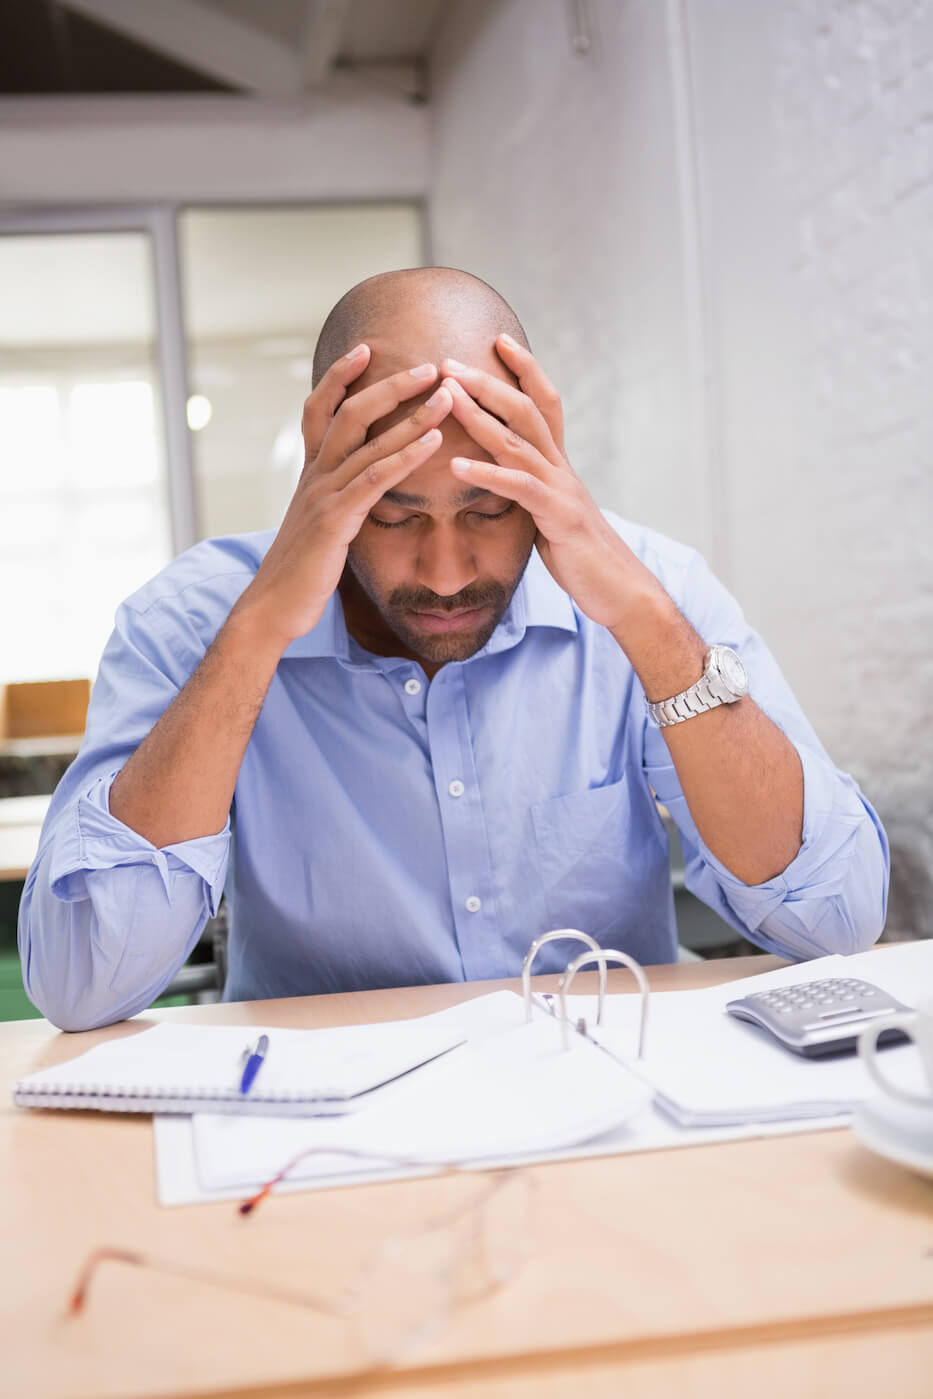 overthinking black male executive looking stressed with hands in his head